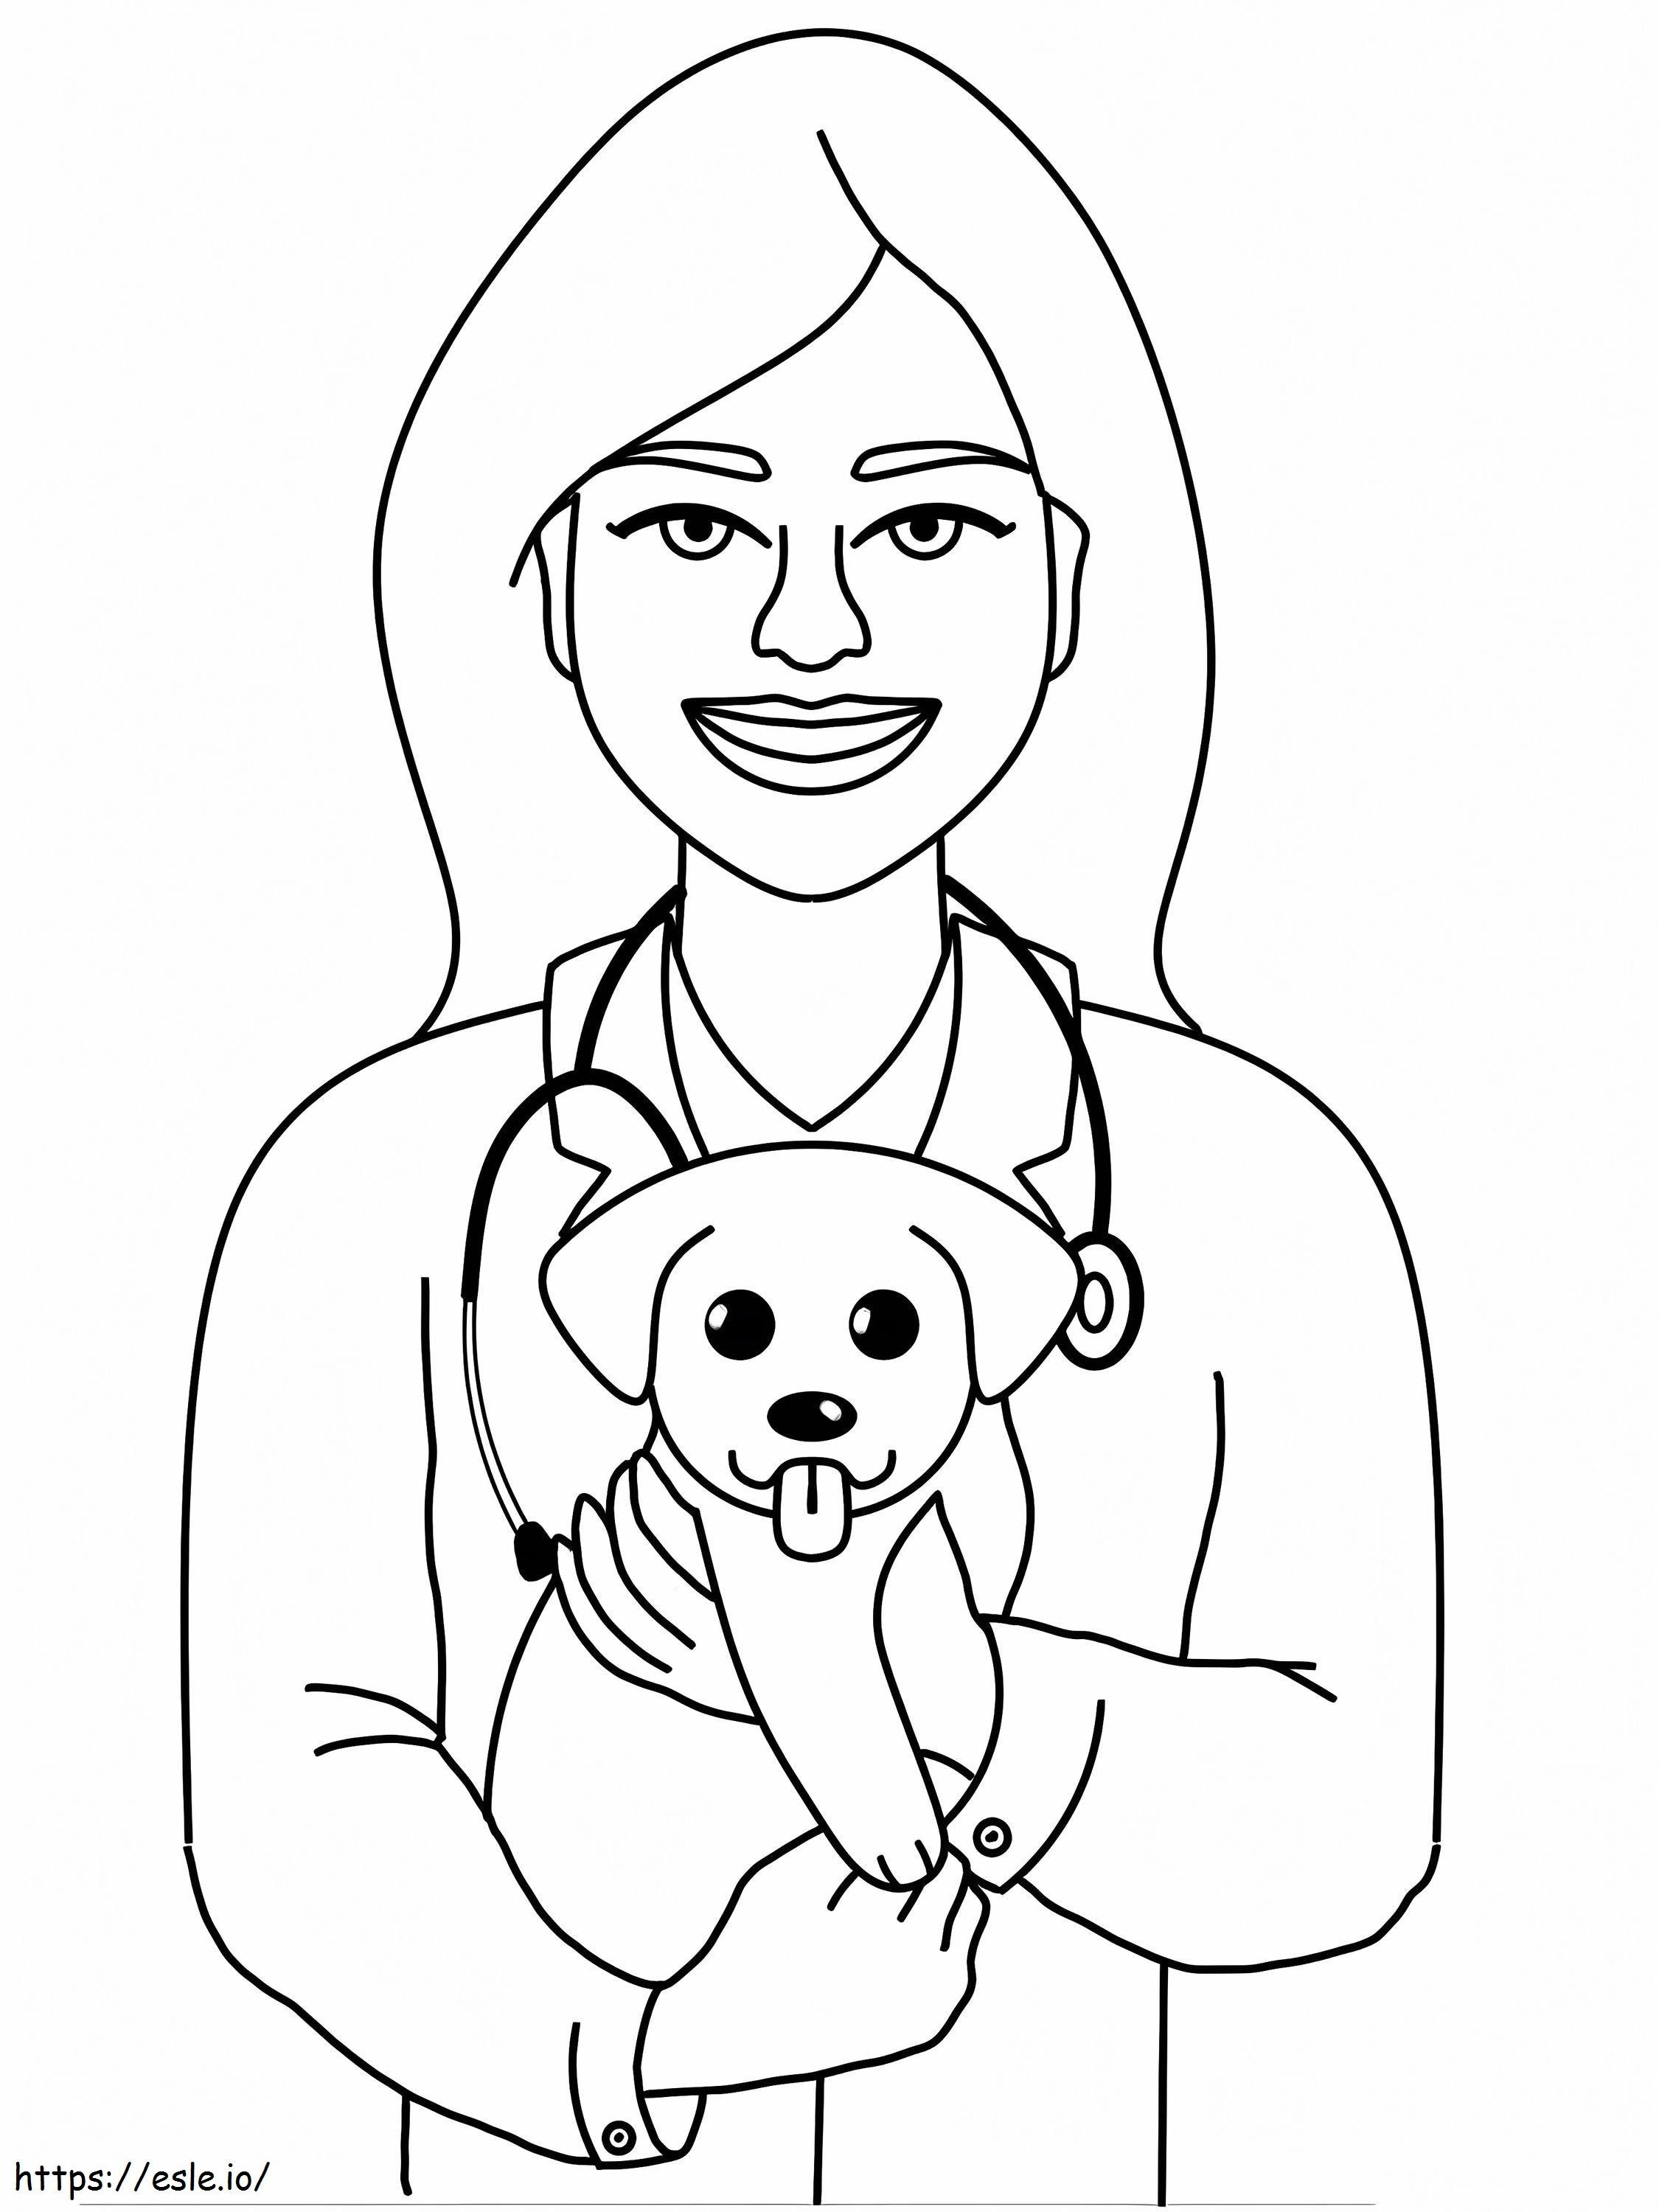 Printable Vet coloring page